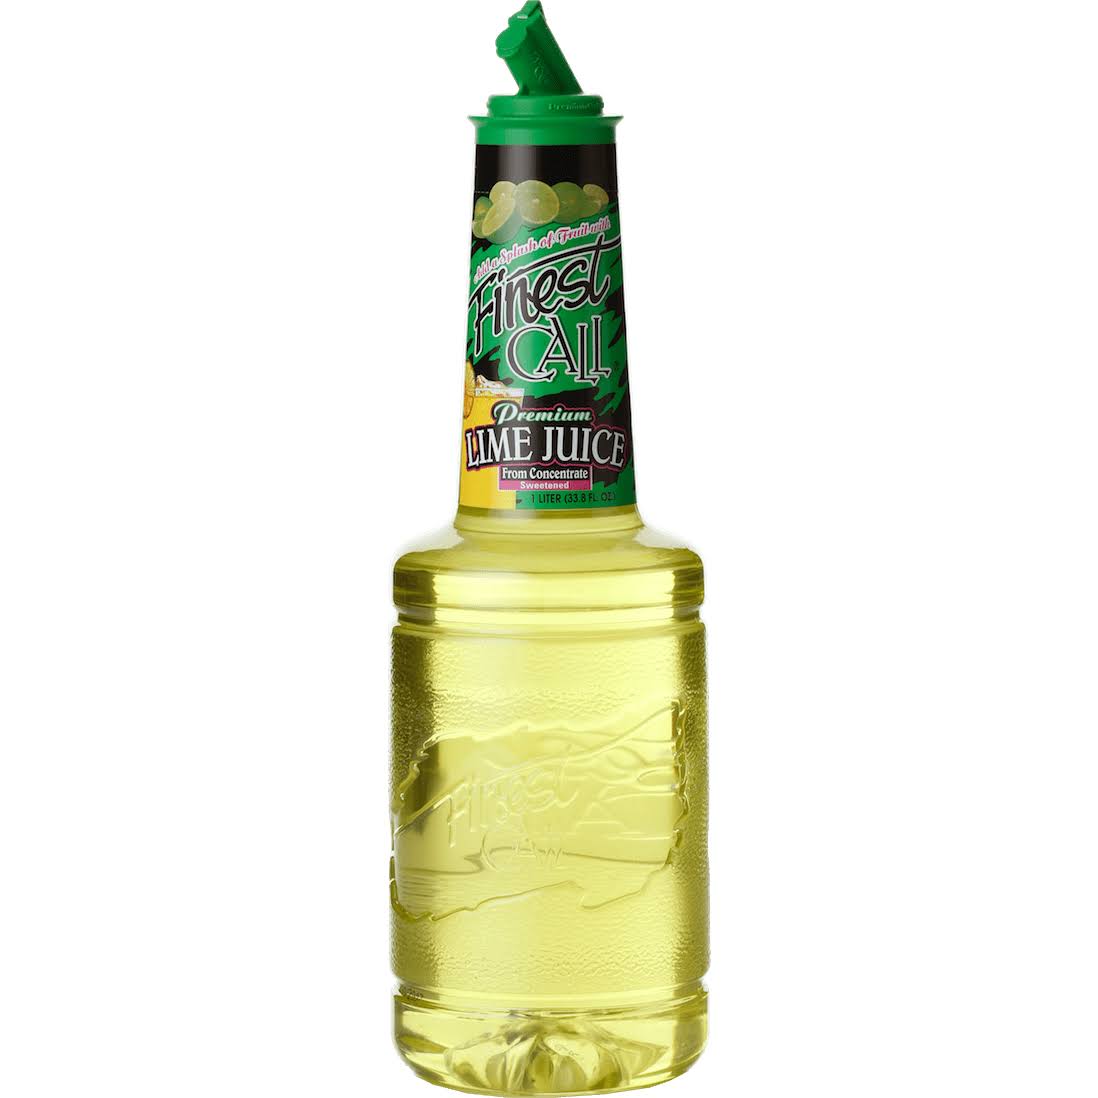 Finest Call Lime Juice - 1l